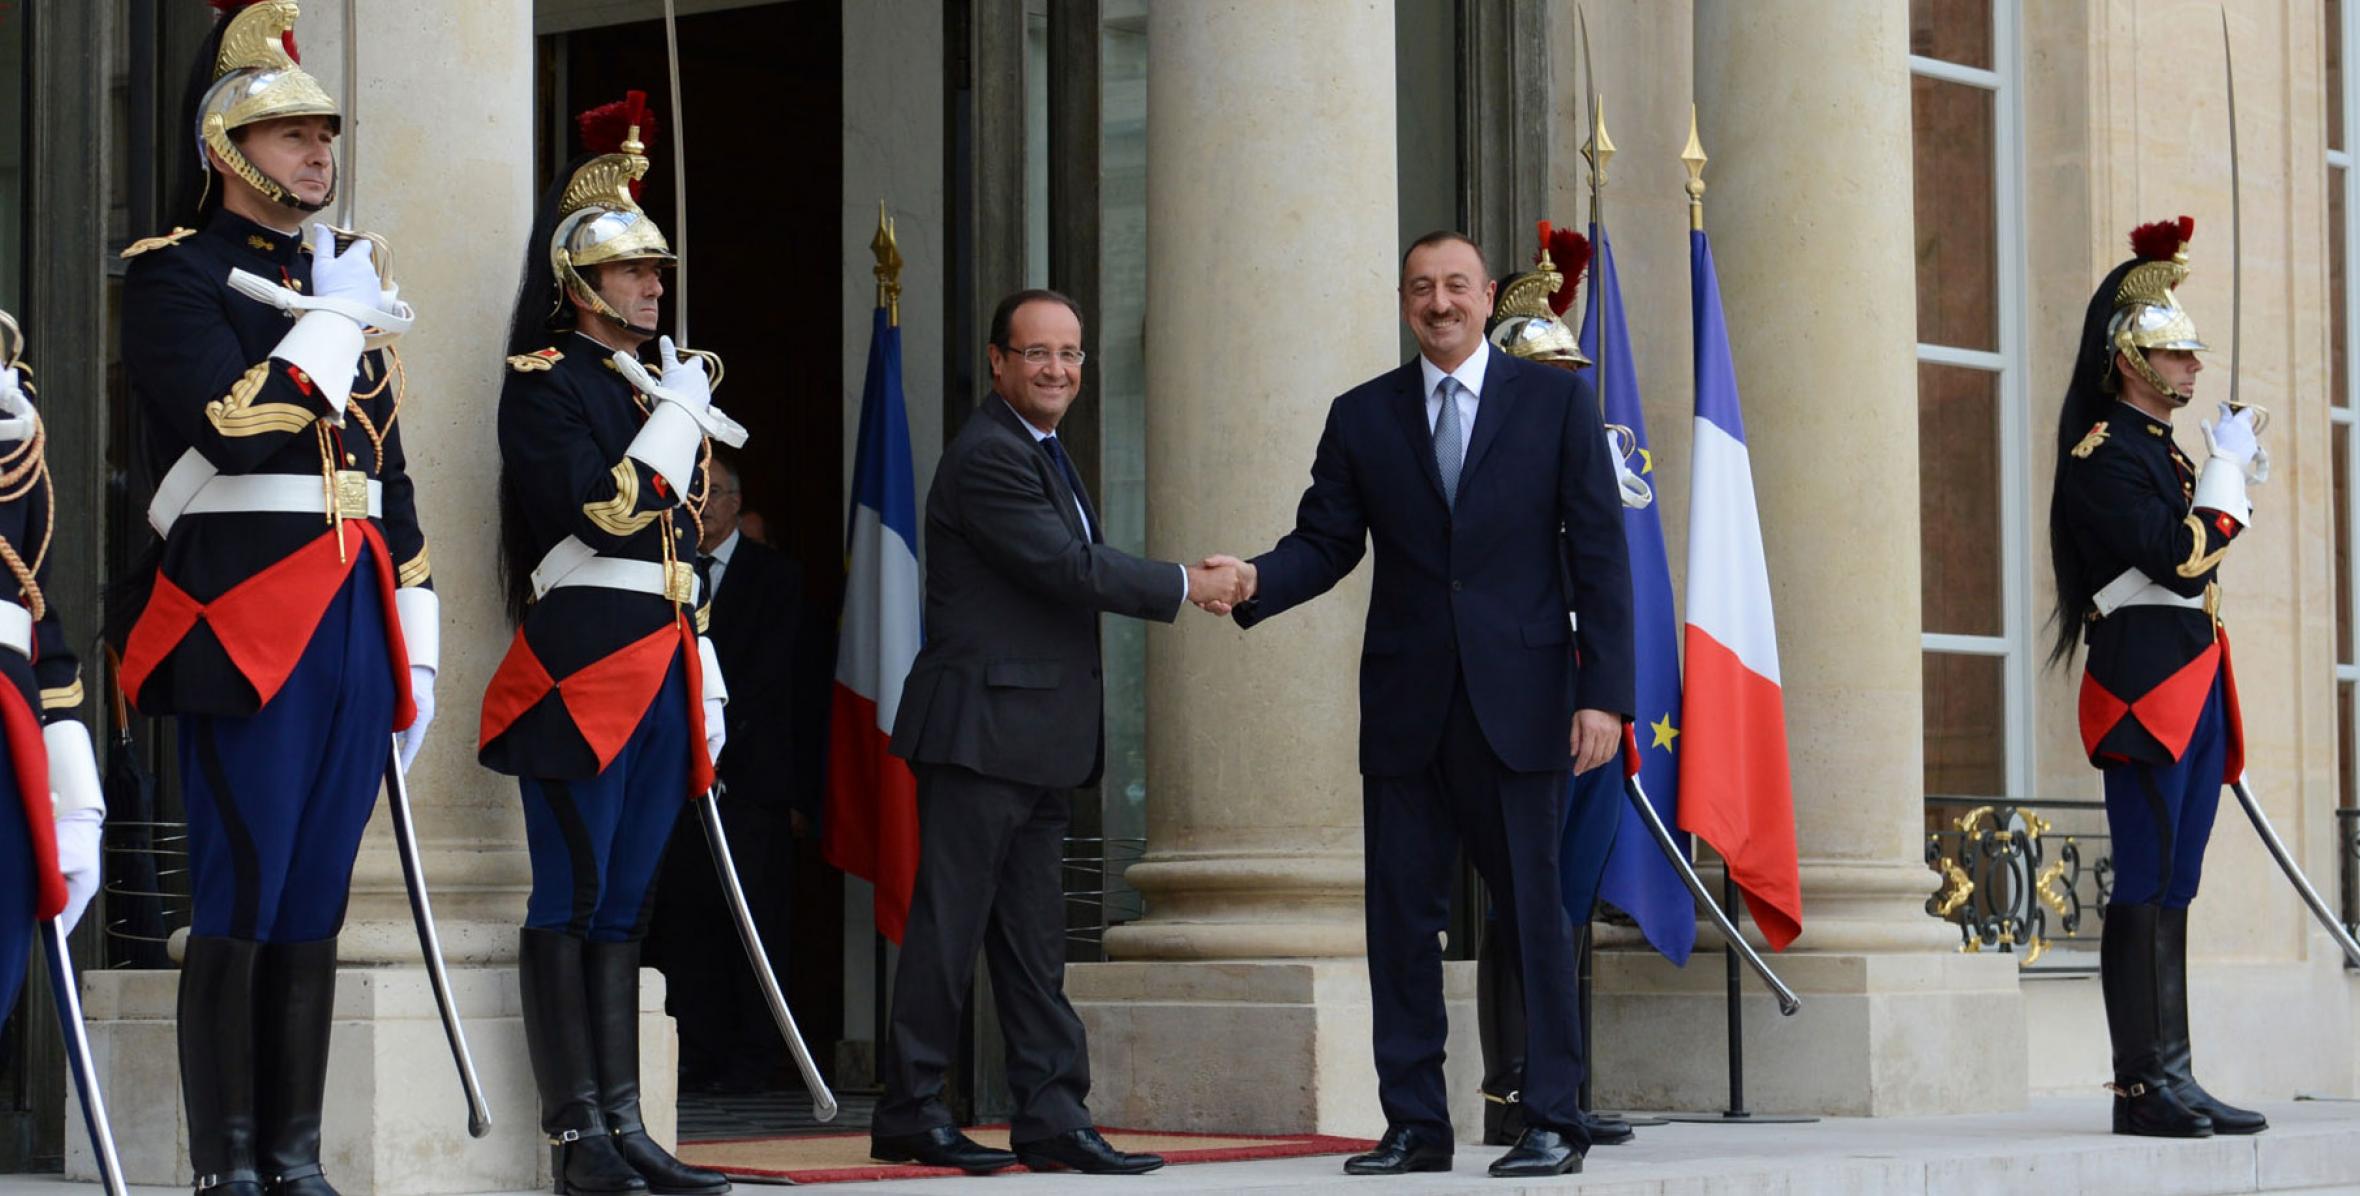 Ilham Aliyev met with President of the French Republic Francois Hollande